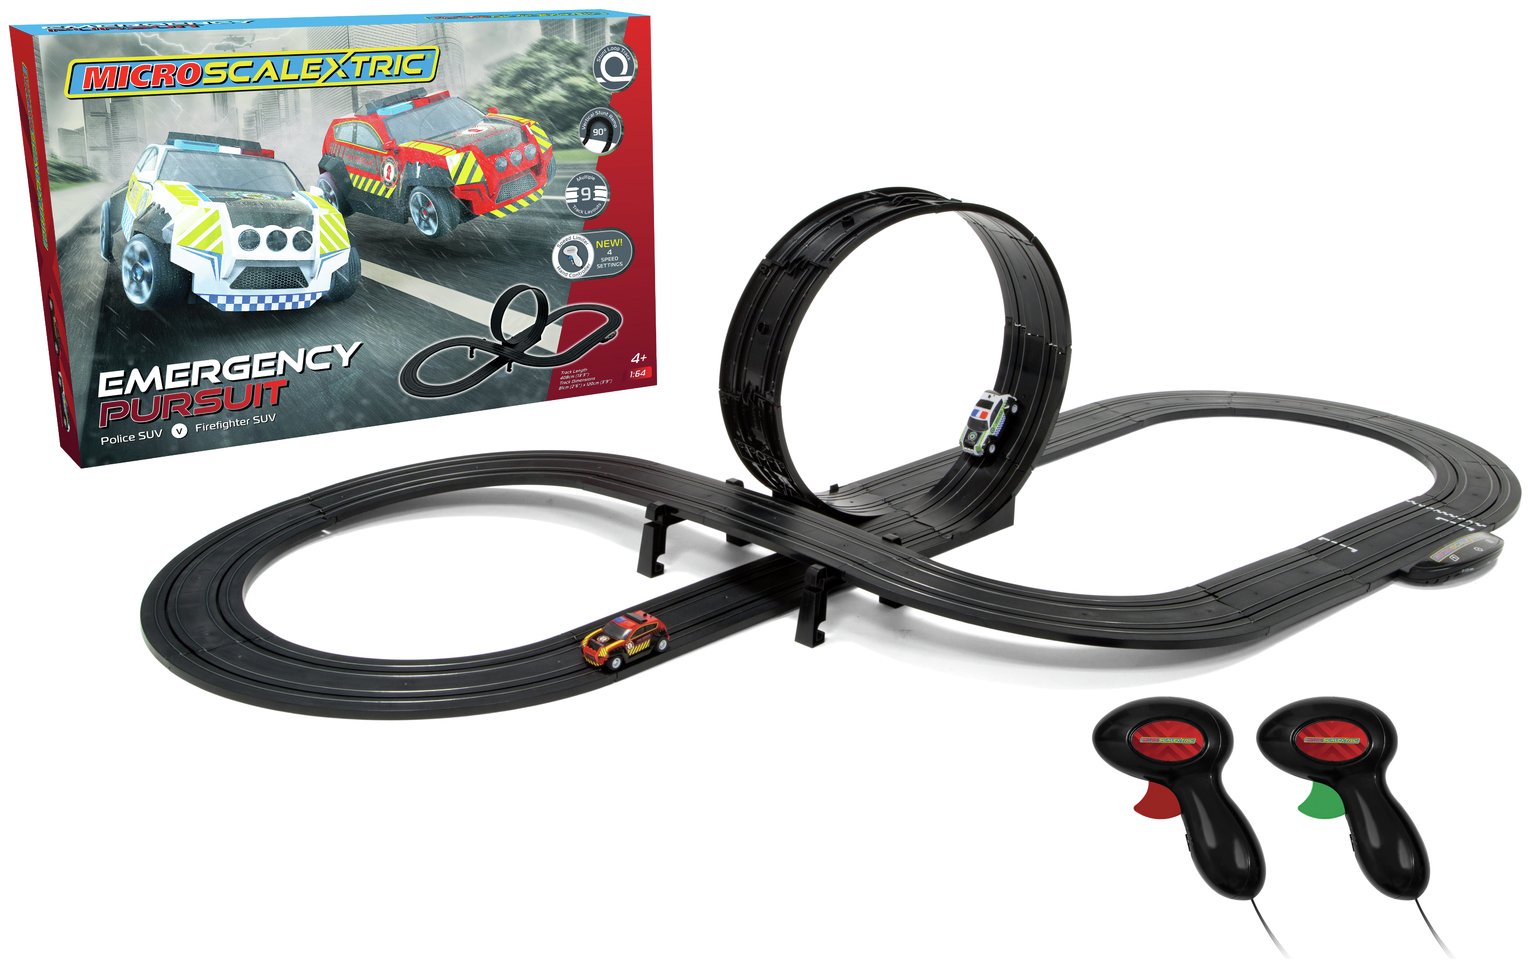 Scalextric Emergency Pursuit Playset Review